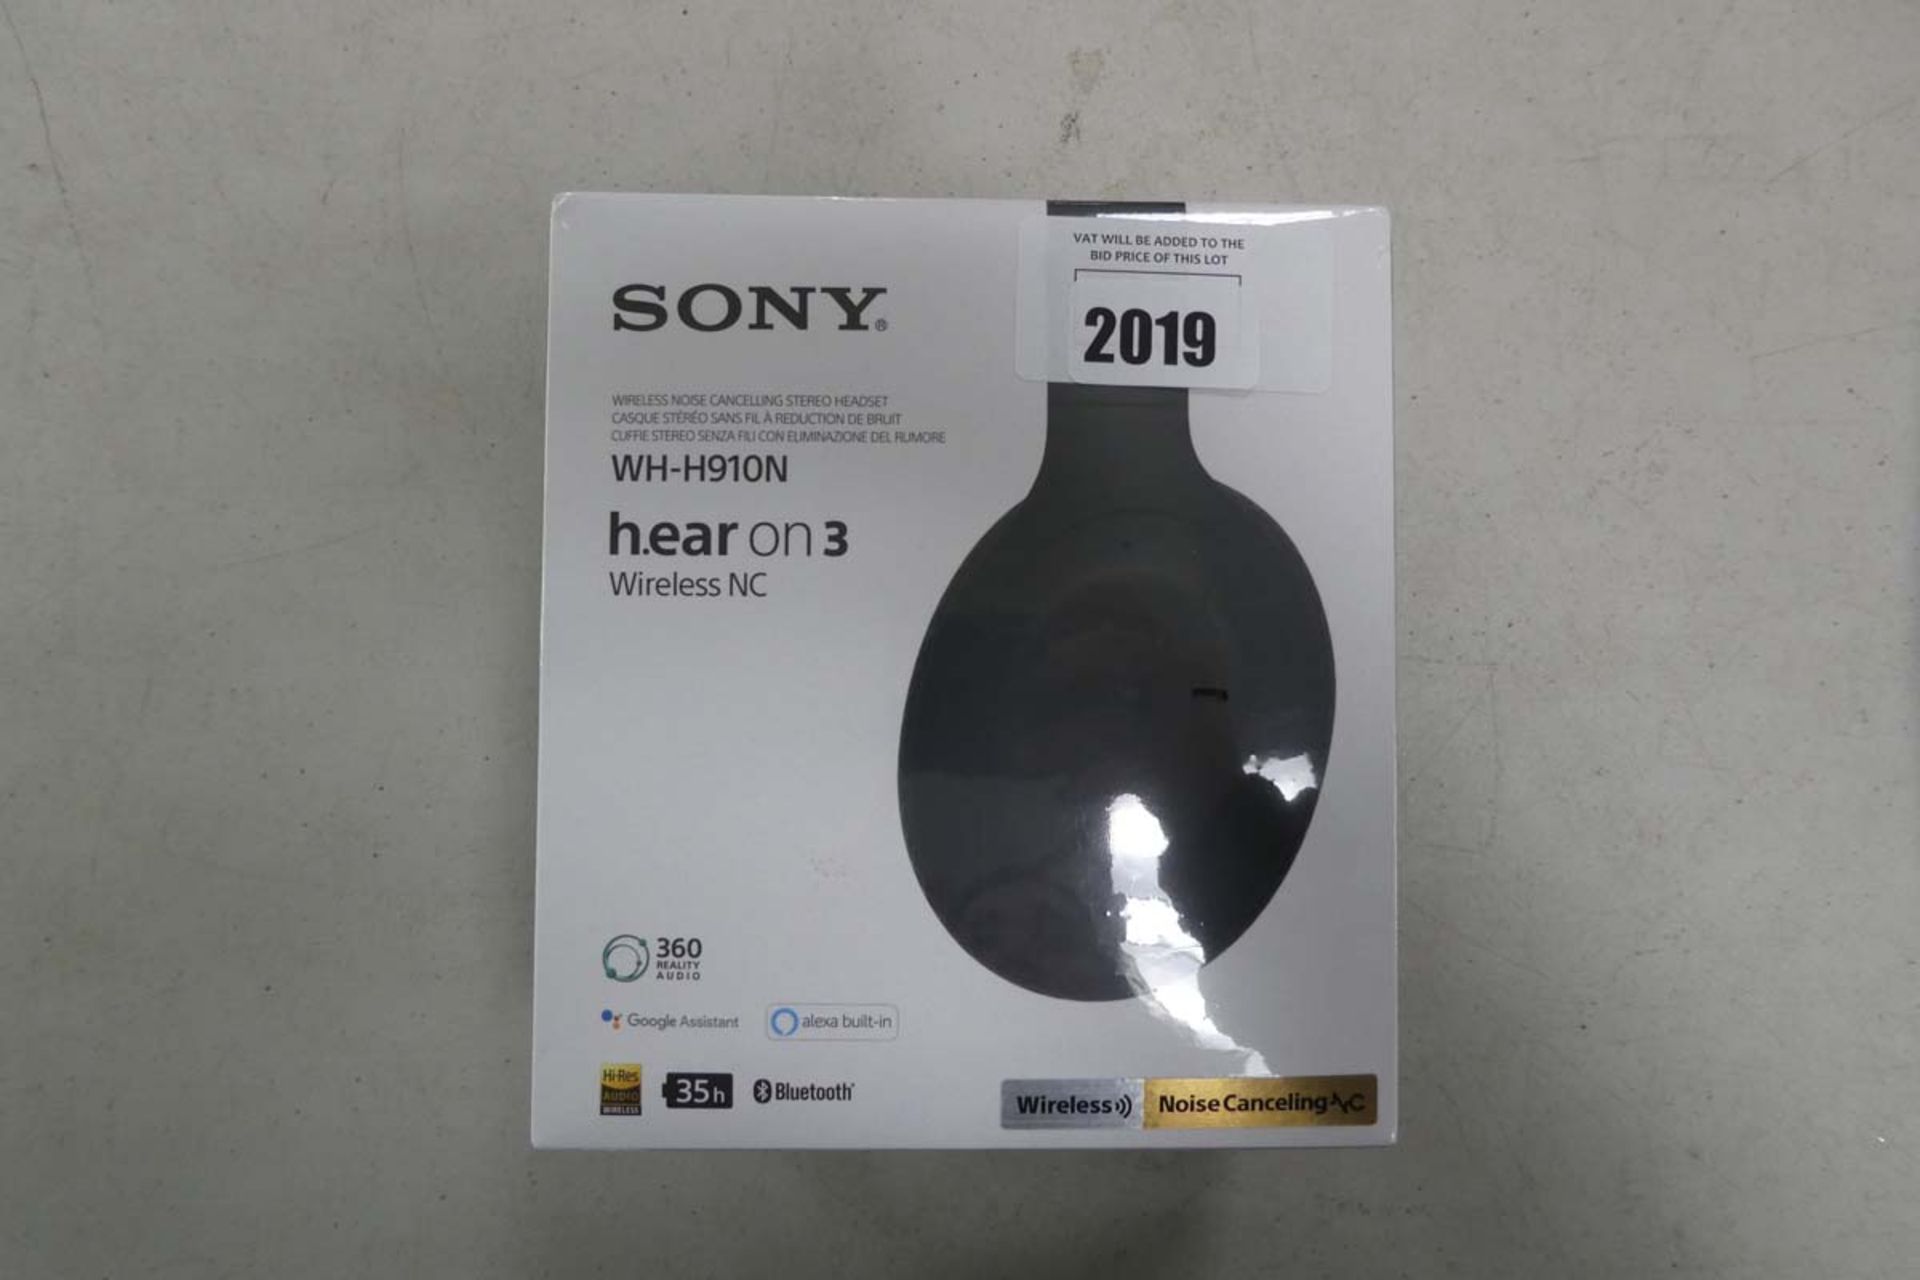 Sony WH-H910N wireless noise cancelling headset in sealed box